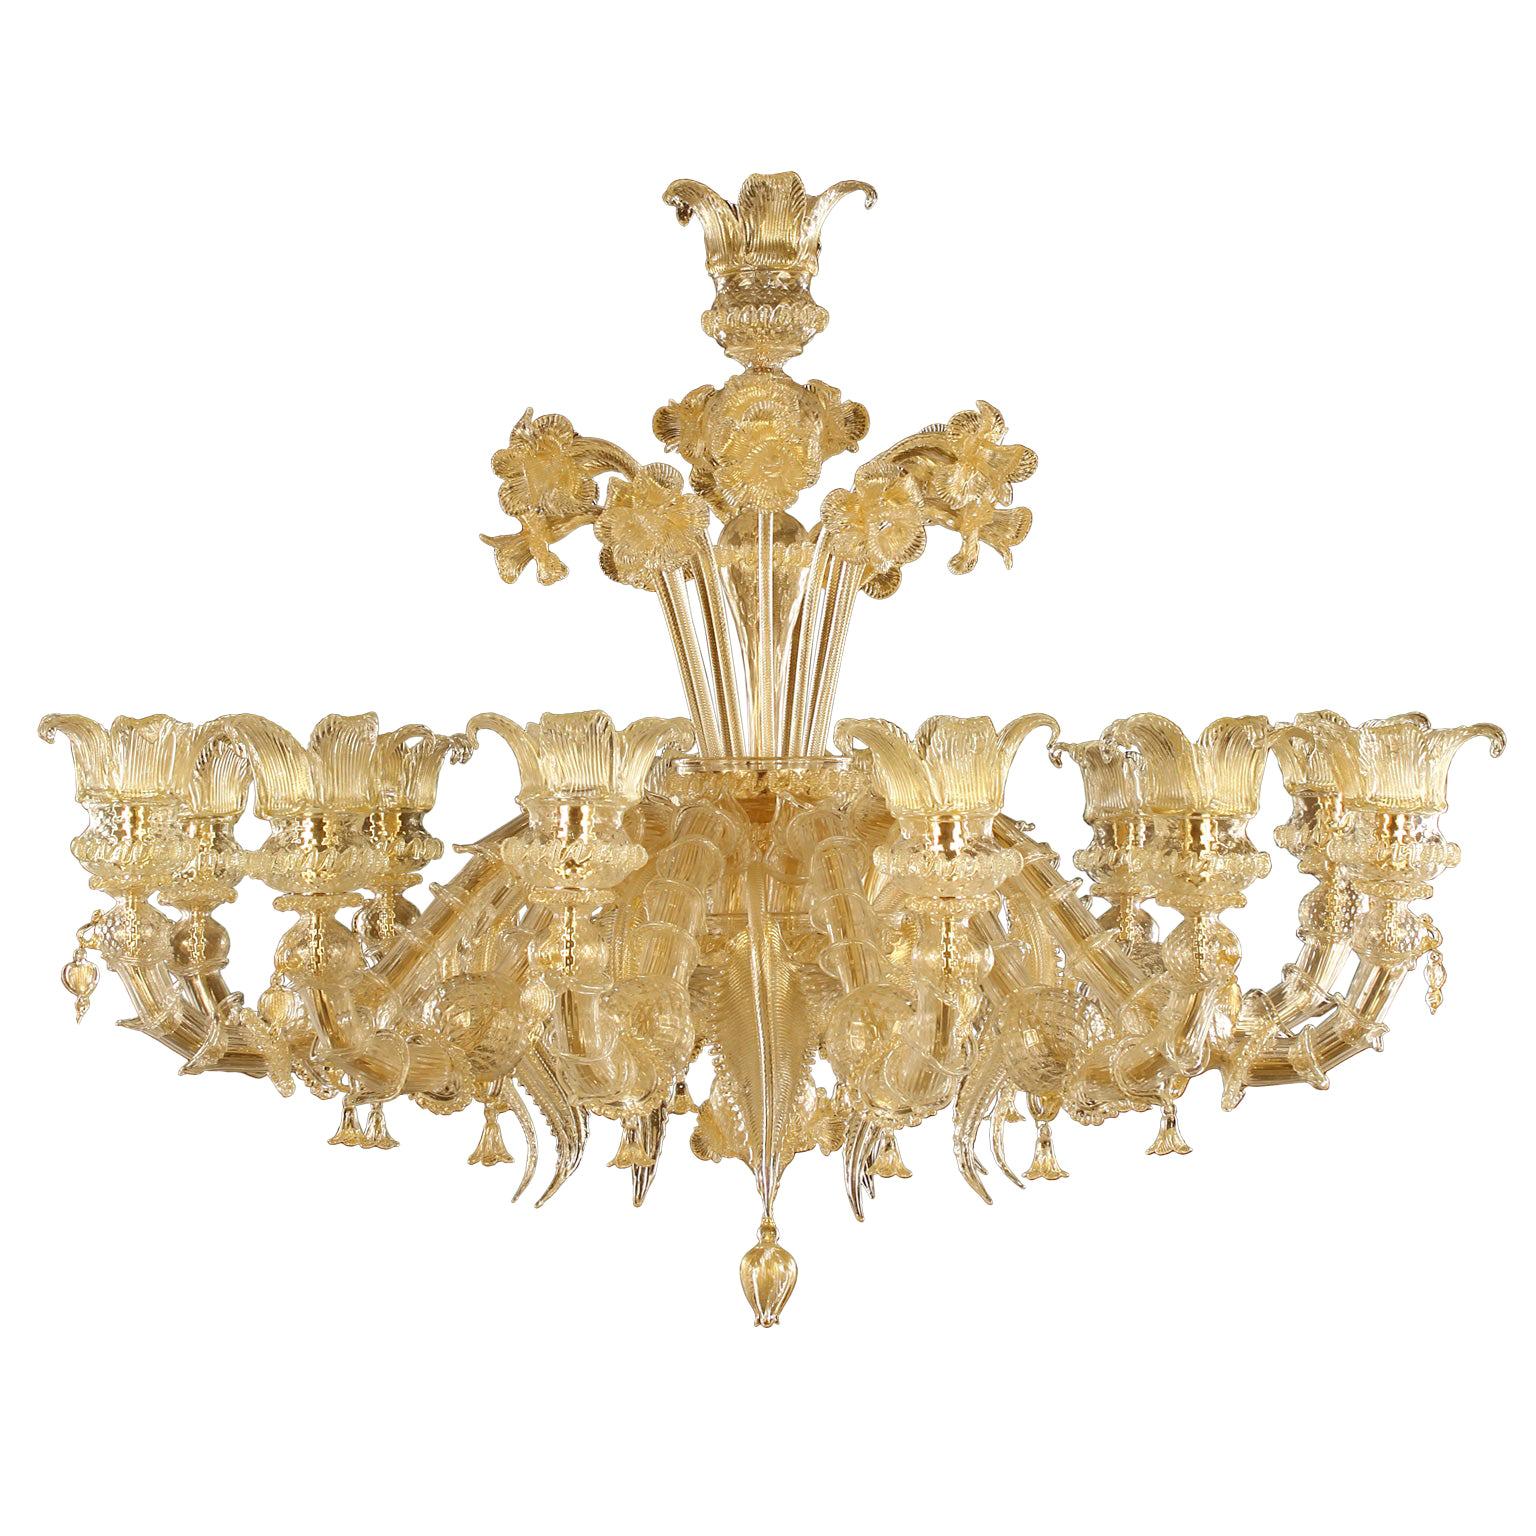 Luxury Artistic Rezzonico Chandelier 12 Arms Gold Murano Glass by Multiforme For Sale